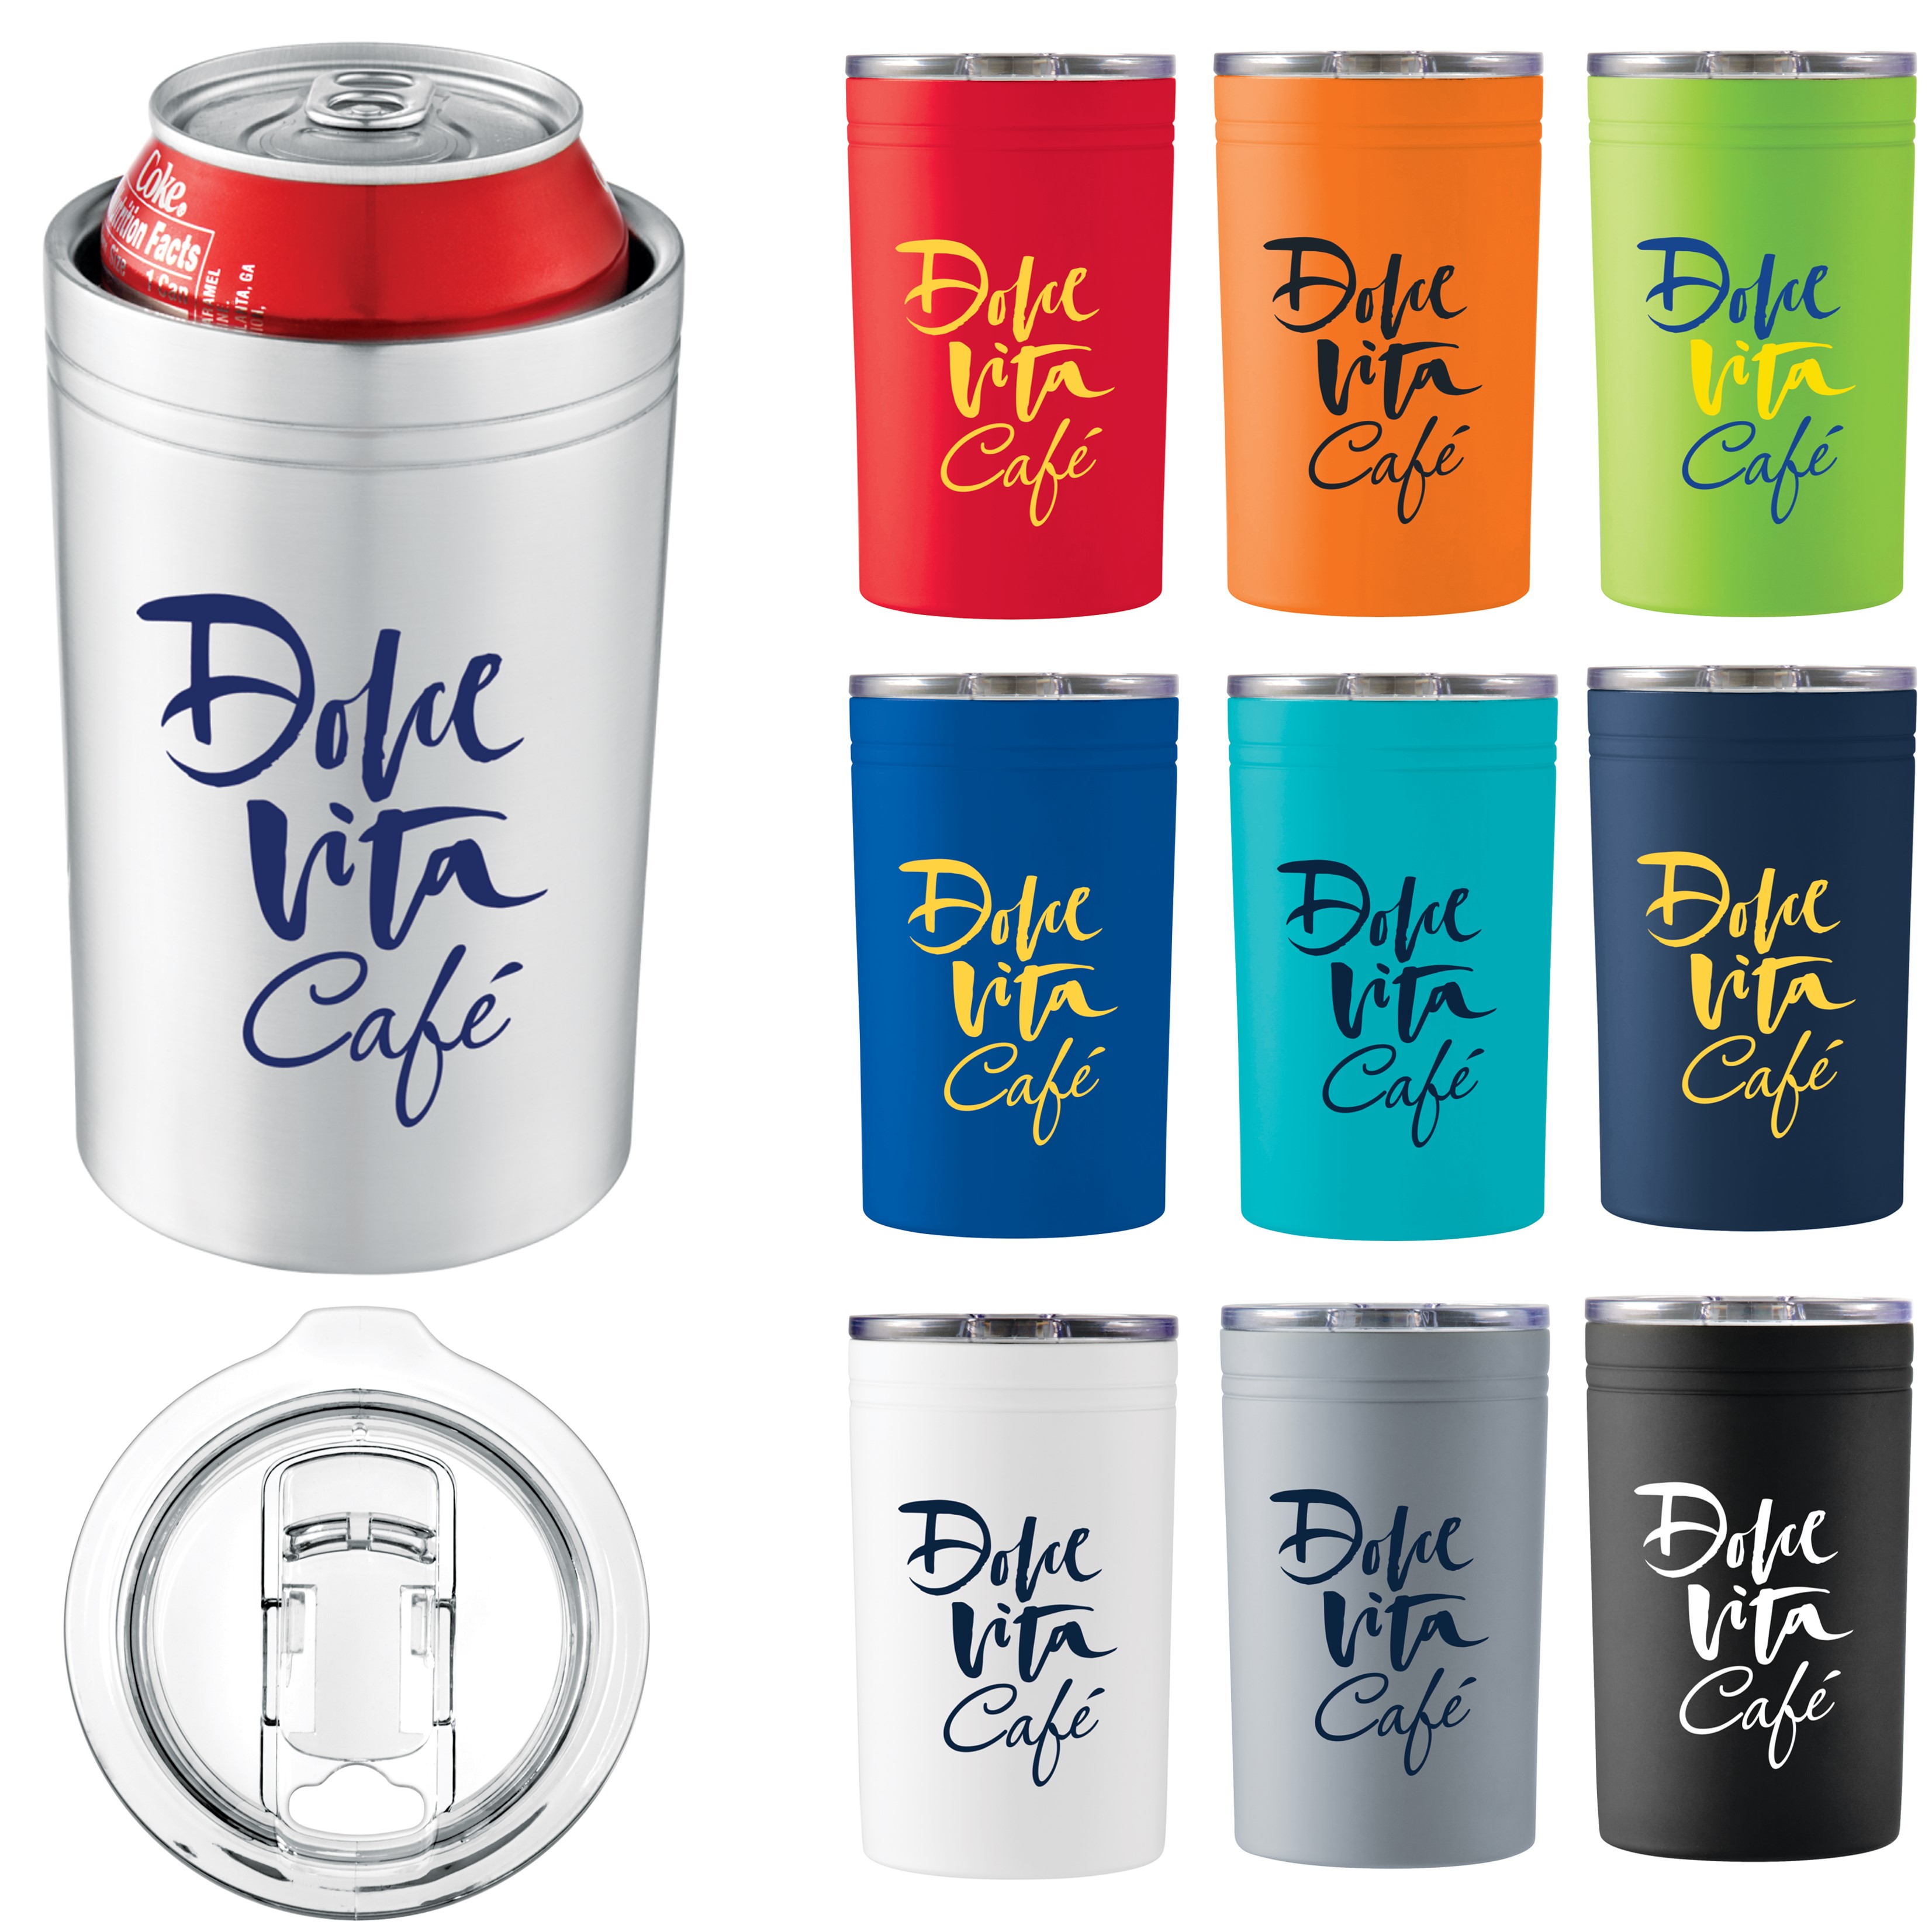 2-in-1 Insulated Can Cooler and Tumbler | 11 oz